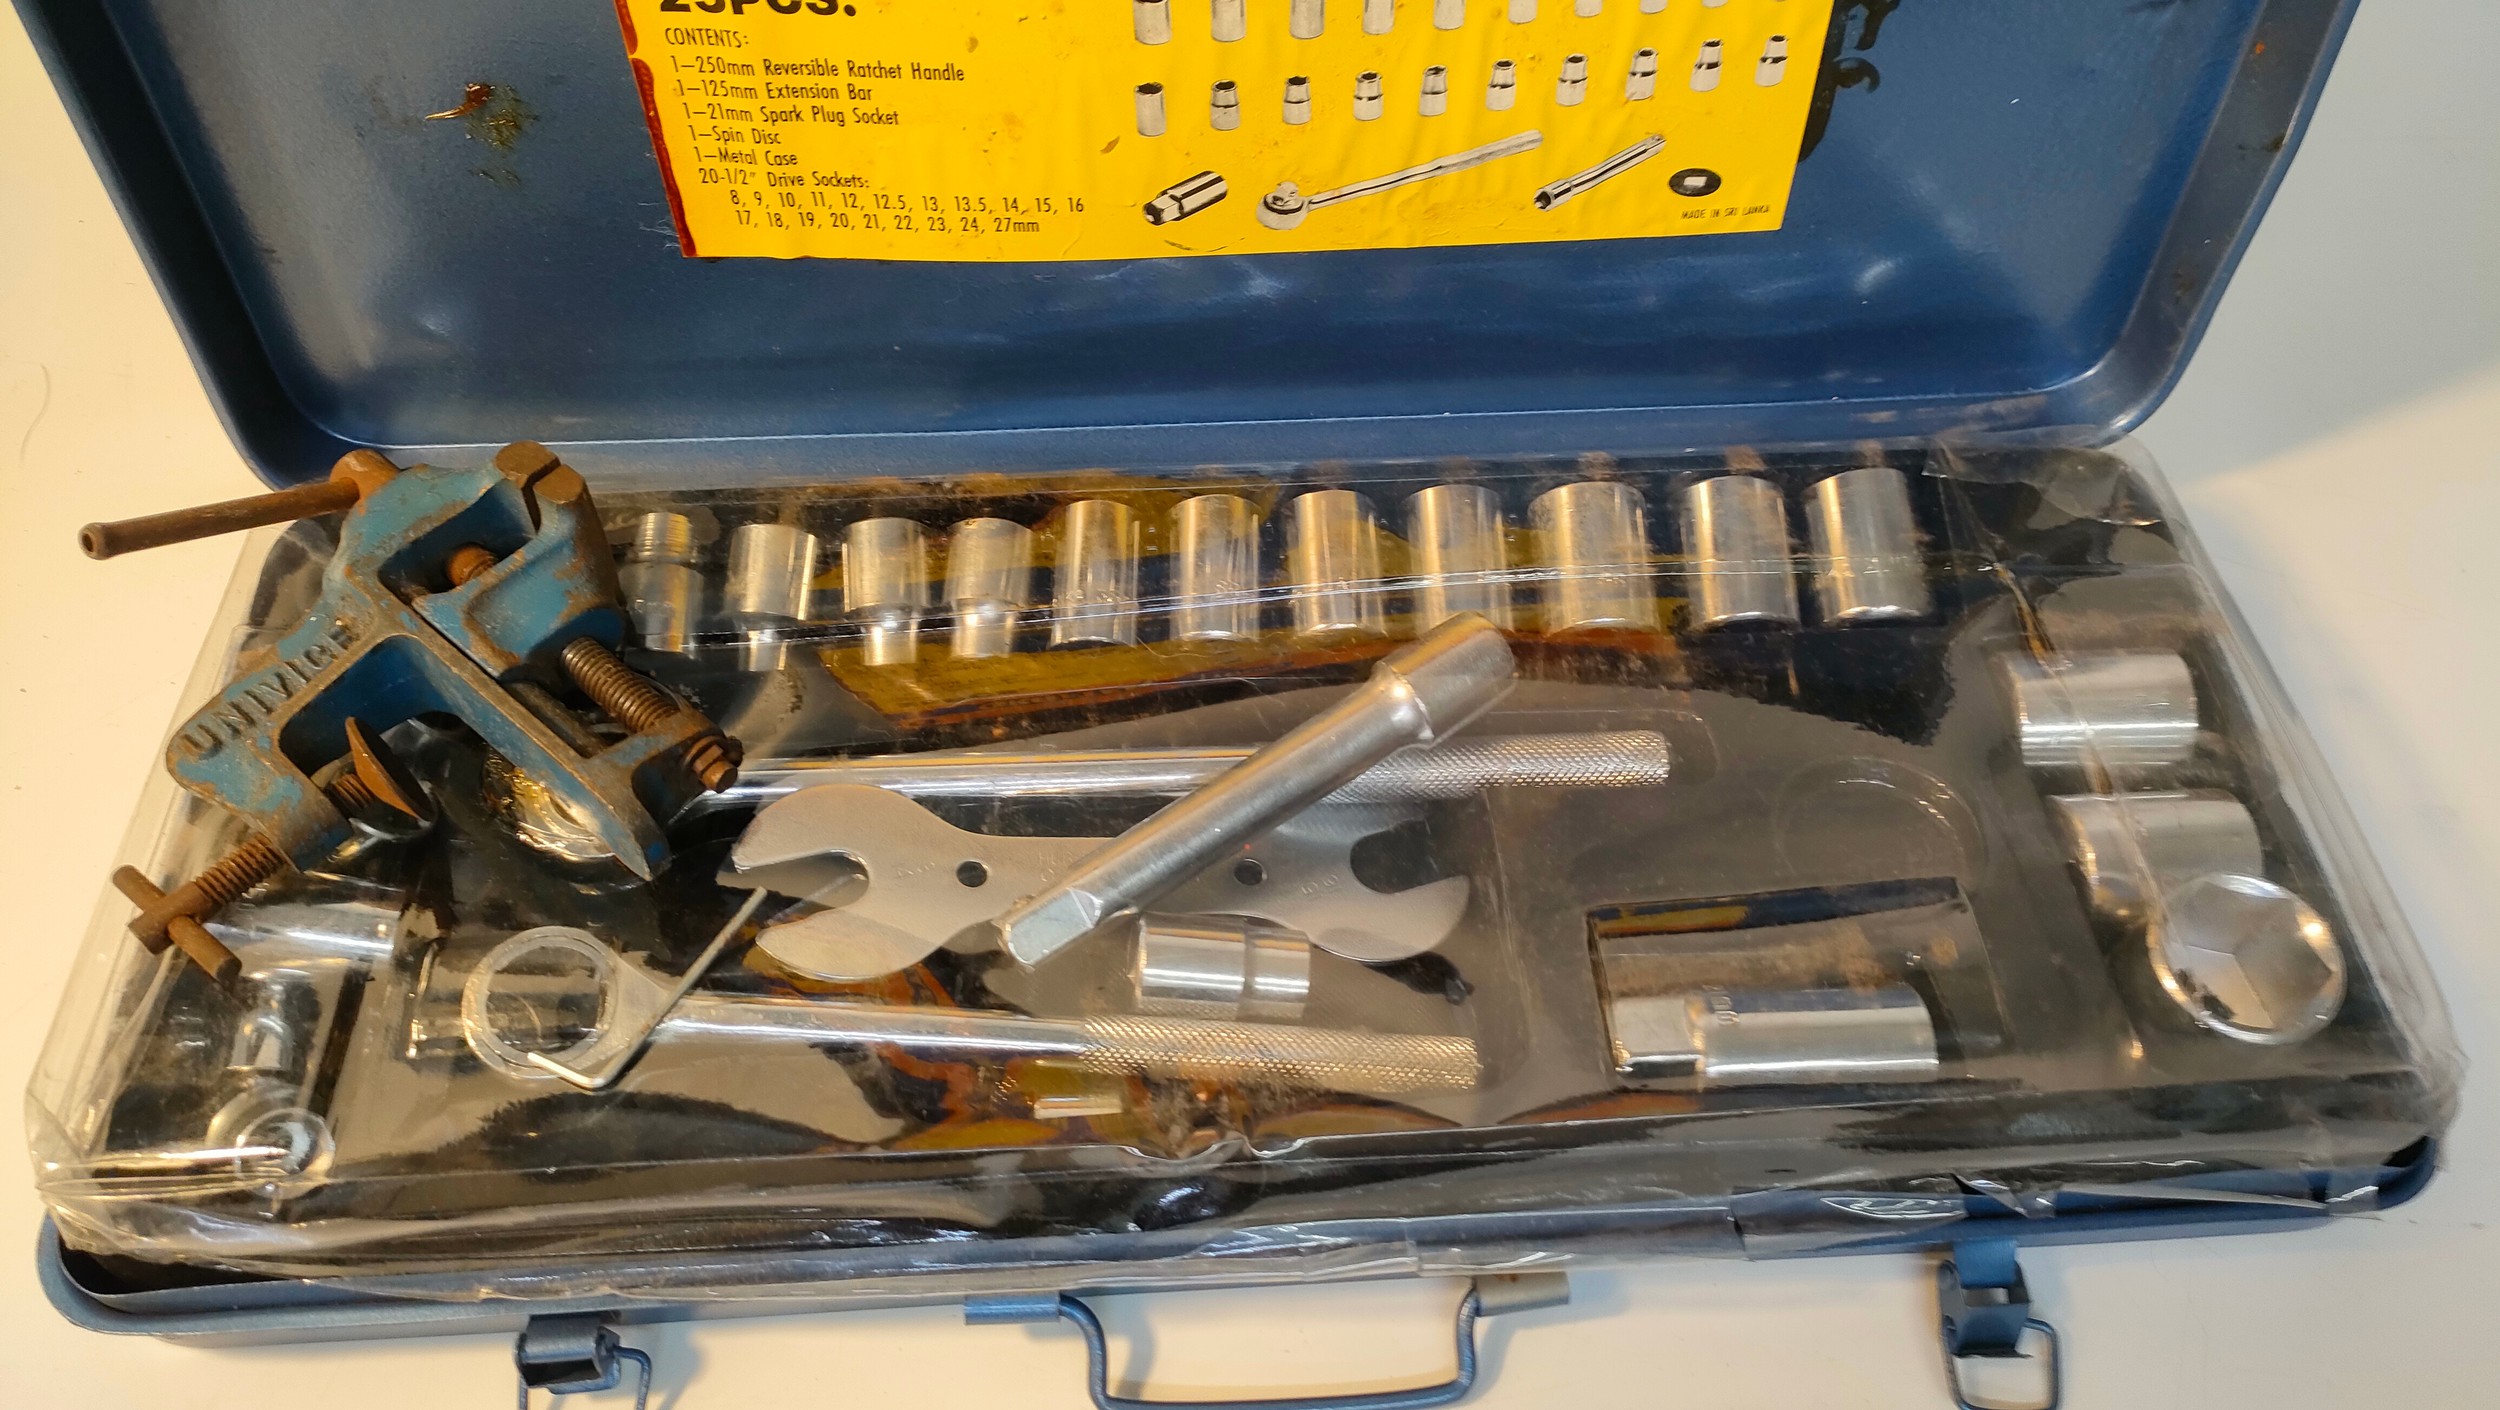 Tuff tool box with selection of tools. - Image 3 of 3